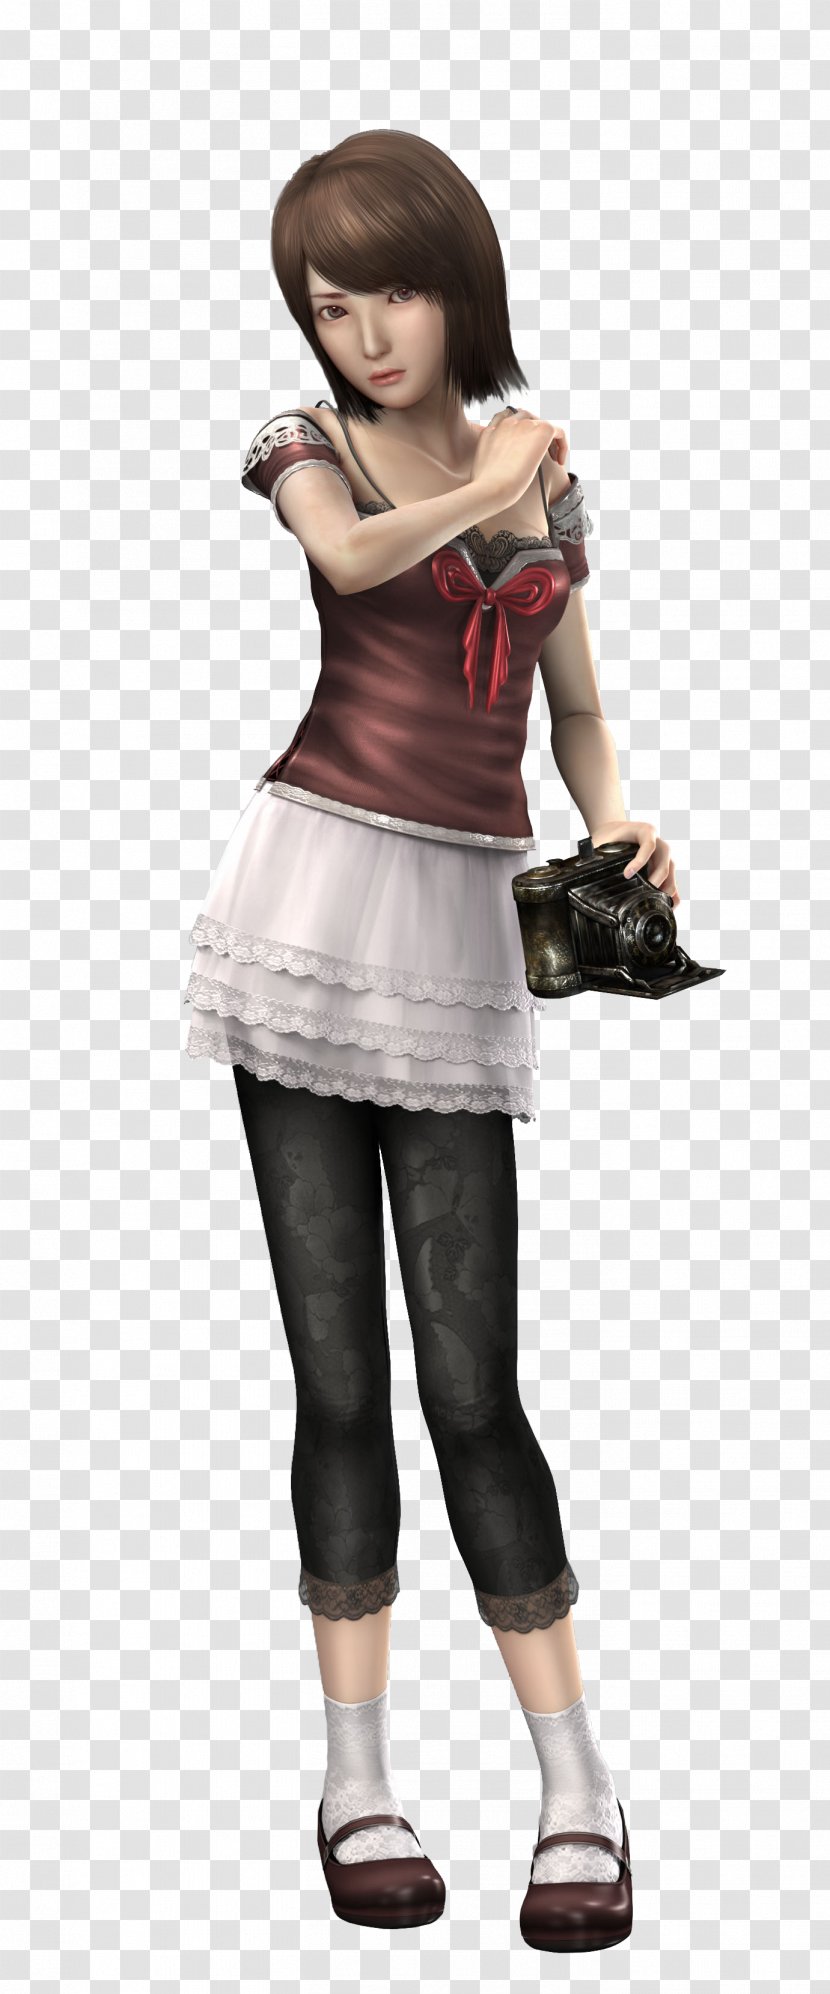 Fatal Frame II: Crimson Butterfly Project Zero 2: Wii Edition Frame: Maiden Of Black Water Mask The Lunar Eclipse - Cartoon - Aya Brea Transparent PNG